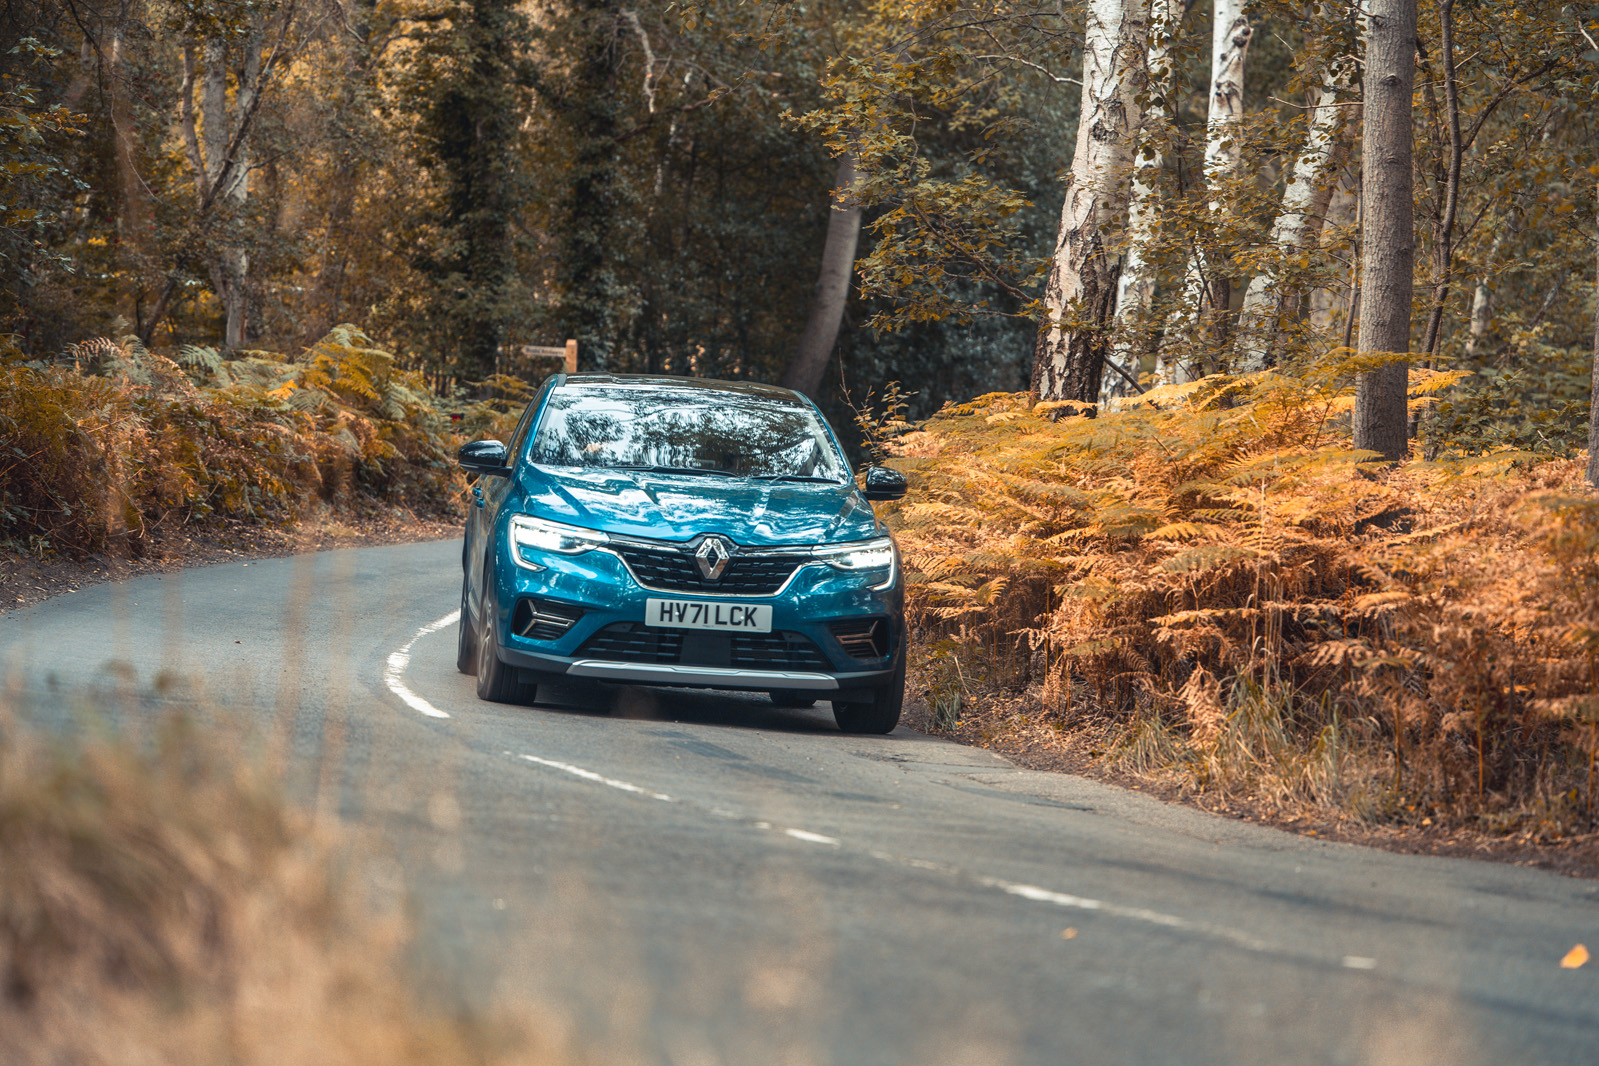 22 Renault Arkana 2021 road test review on road front